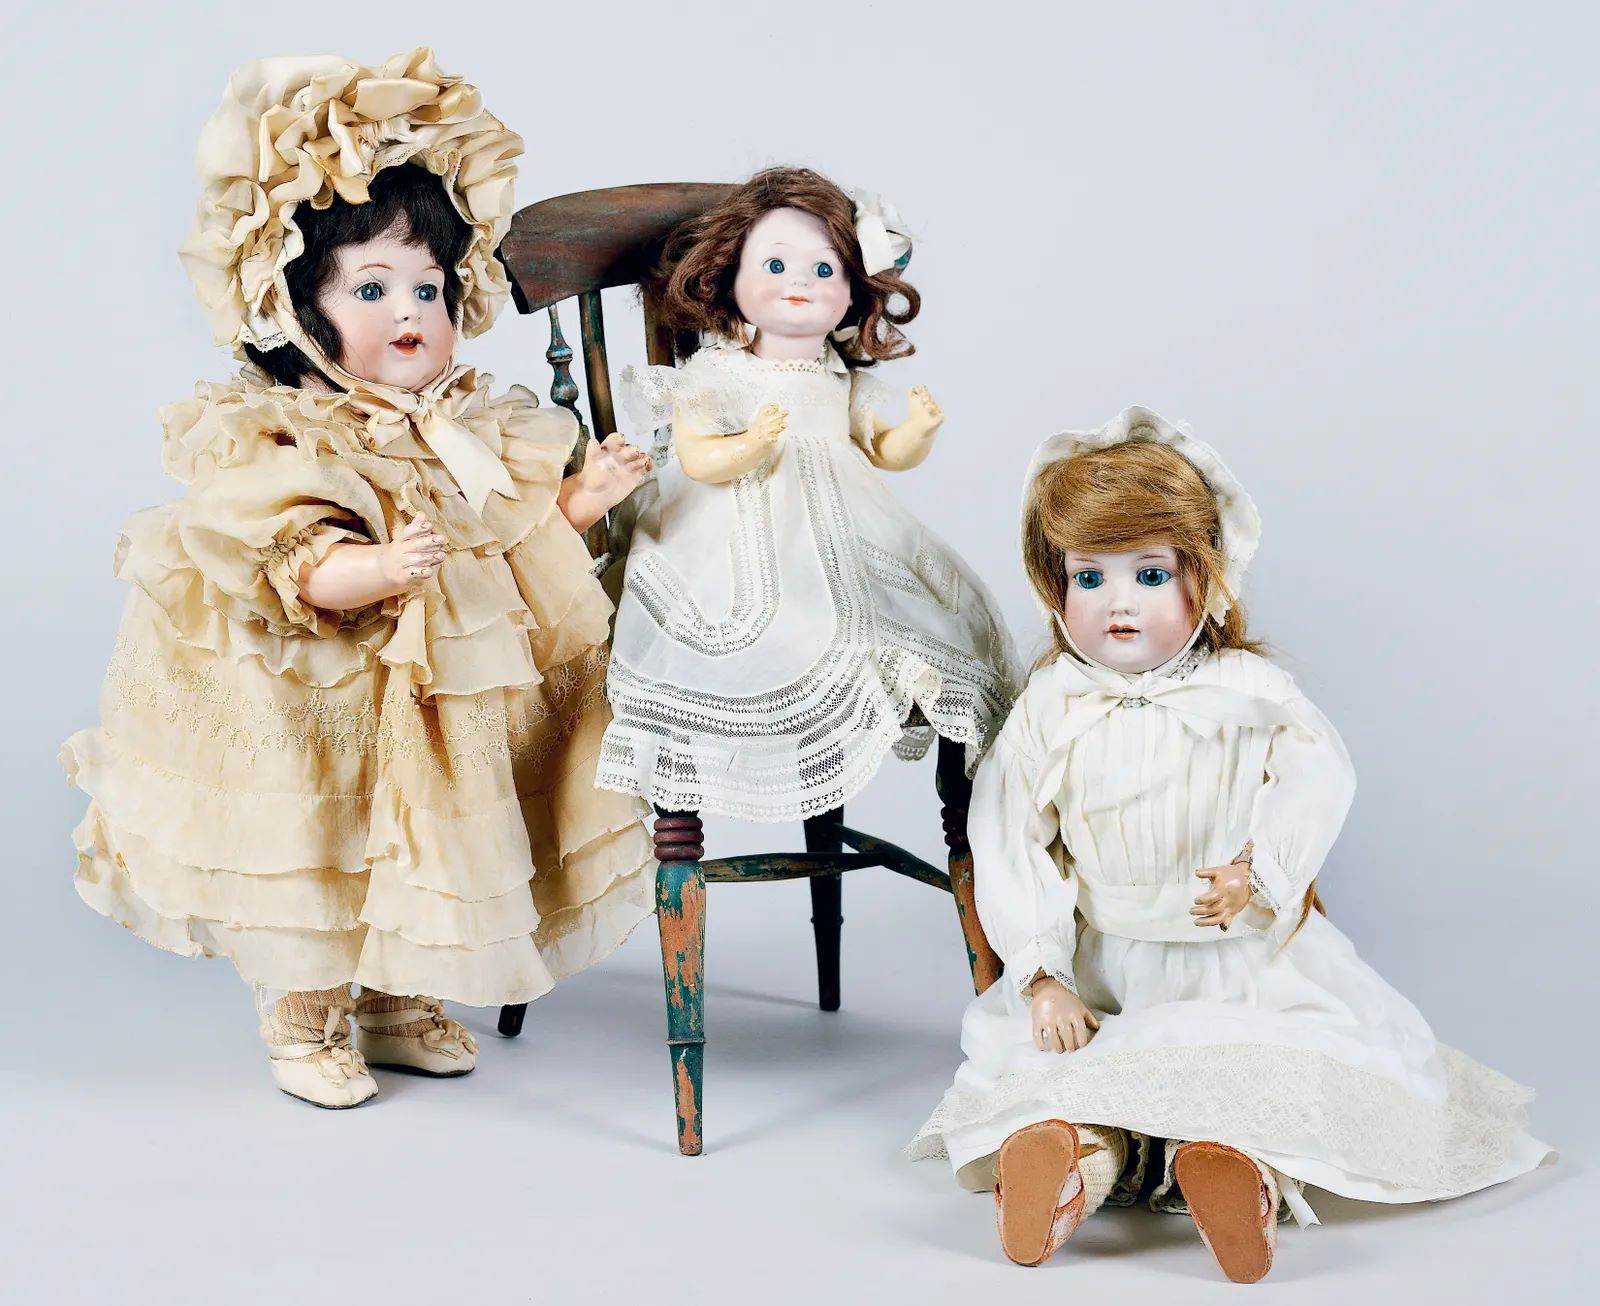 17-enigmatic-facts-about-porcelain-dolls